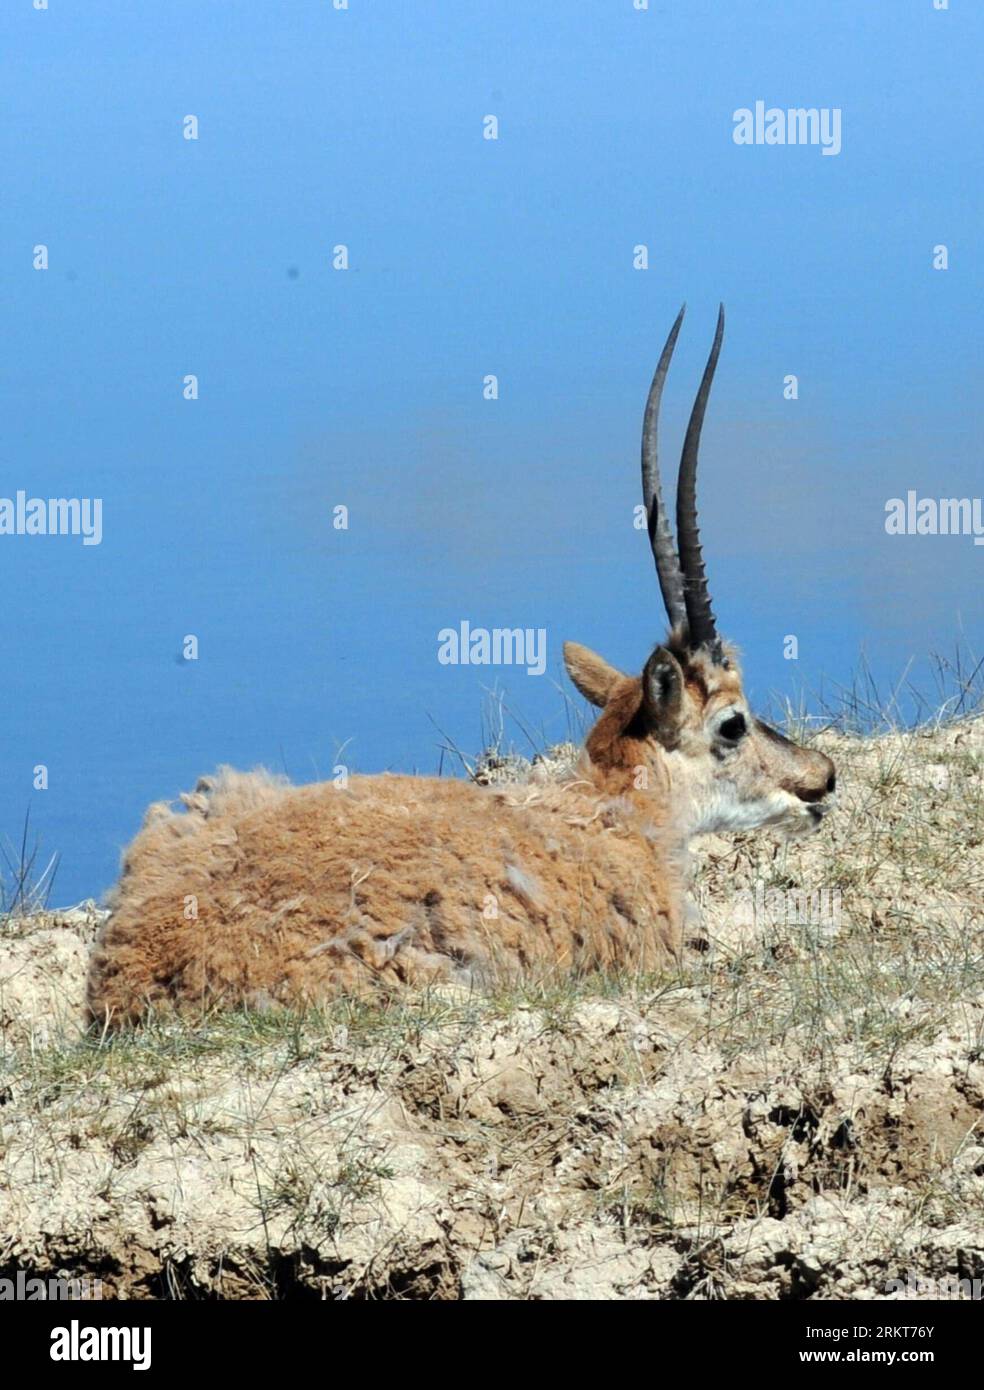 Bildnummer: 58393256  Datum: 27.08.2012  Copyright: imago/Xinhua GOLMUD, Aug. 27, 2012 - A Tibetan antelope rests at the fenced grassland of a rescue and care center for the endangered Tibetan antelopes in Hoh Xil, northwest China s Qinghai province, Aug. 27, 2012. The rescue and care center was built in 2003, offering fenced area, shelter and medical treatment for the endangered animals. So far, a total of 339 rare animals, including 251 Tibetan antelopes have received care at the center, and most of the animals have been released into the wild after recovery. Now 26 Tibetan antelopes still l Stock Photo